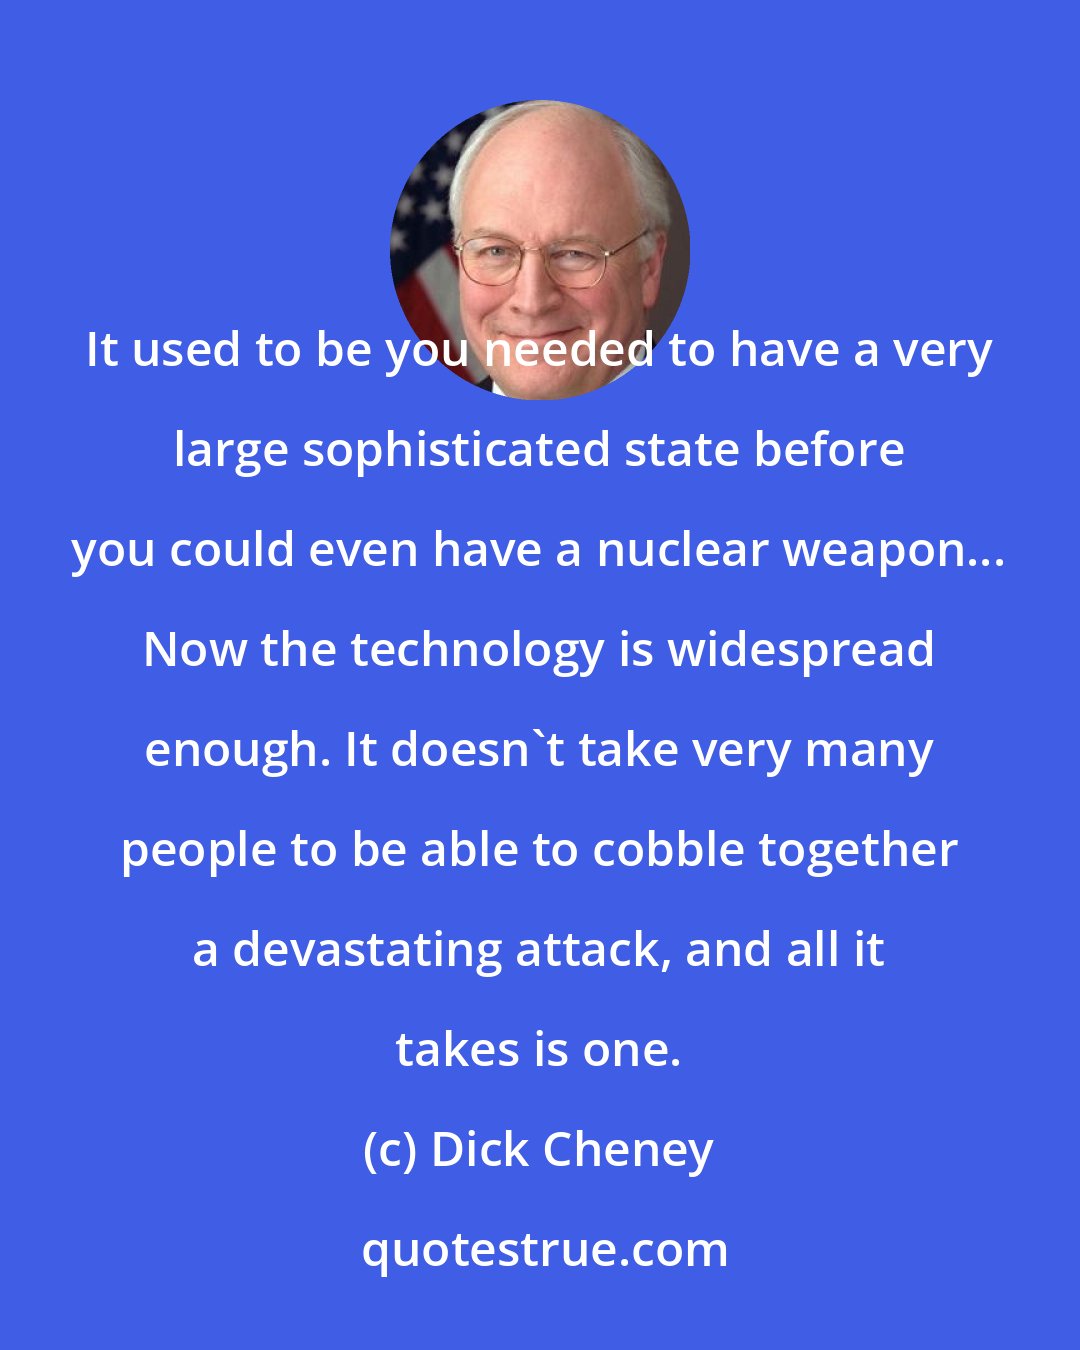 Dick Cheney: It used to be you needed to have a very large sophisticated state before you could even have a nuclear weapon... Now the technology is widespread enough. It doesn't take very many people to be able to cobble together a devastating attack, and all it takes is one.